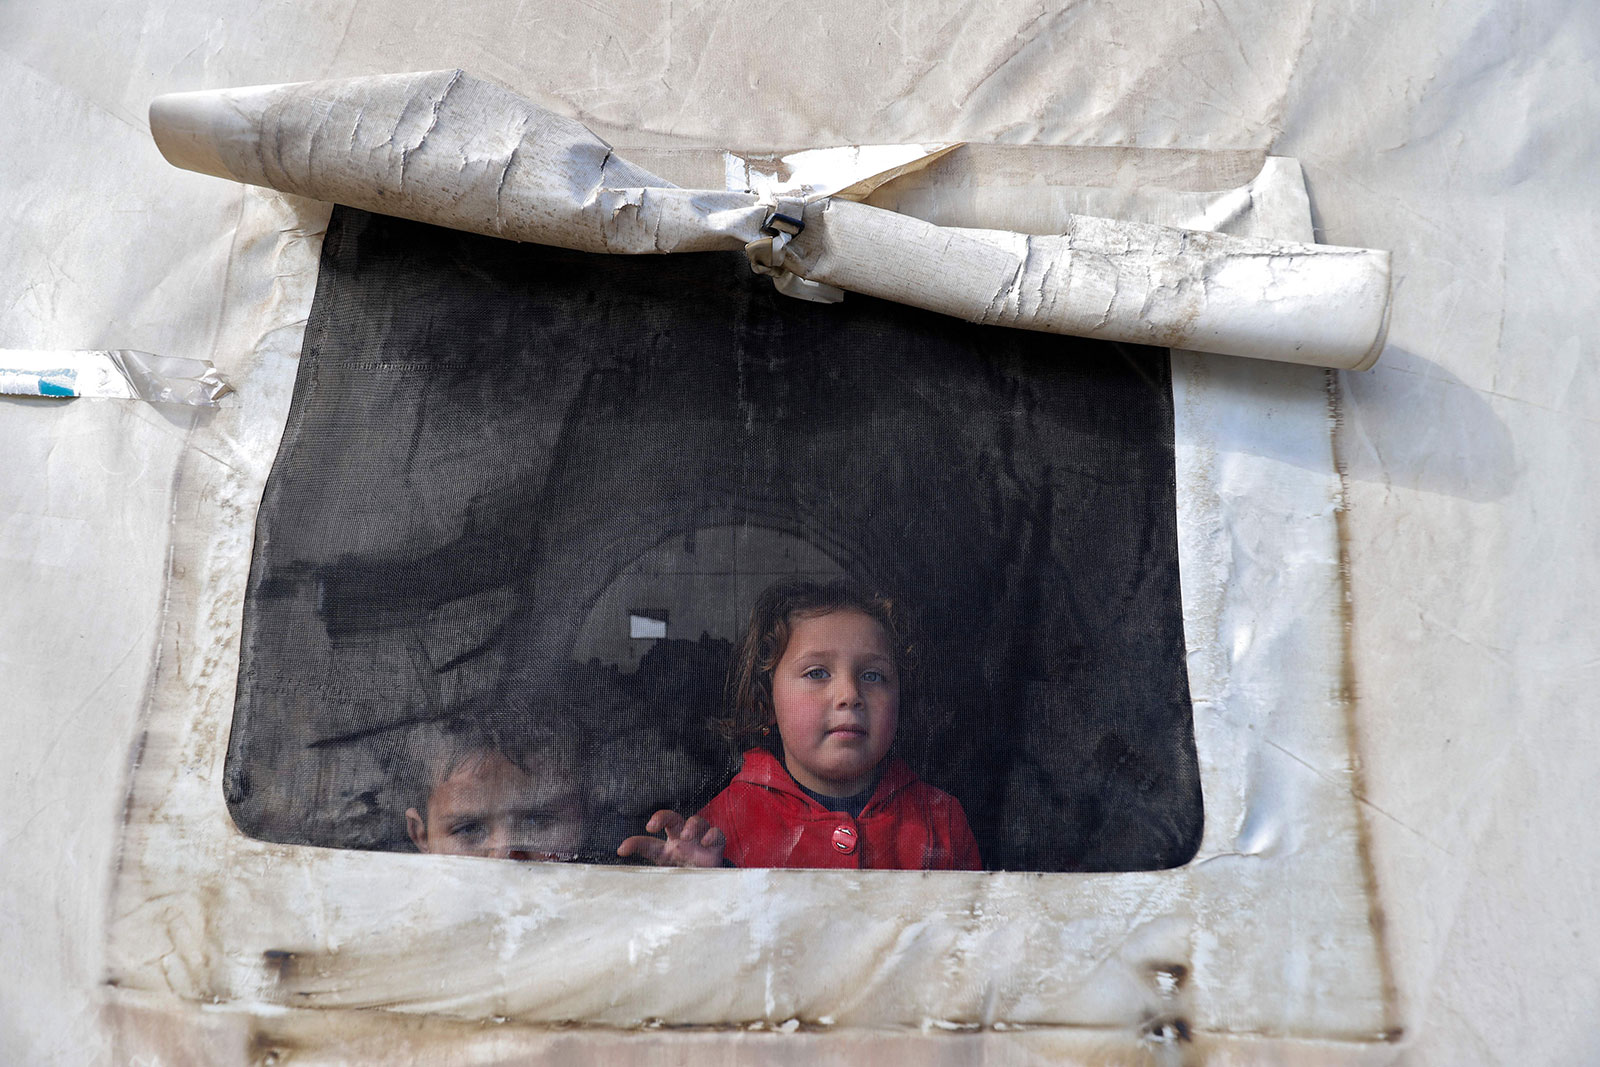 Syrian children look out of the window of a tent at an emergency shelter in the northwestern Idlib province of Syria on February 7.  